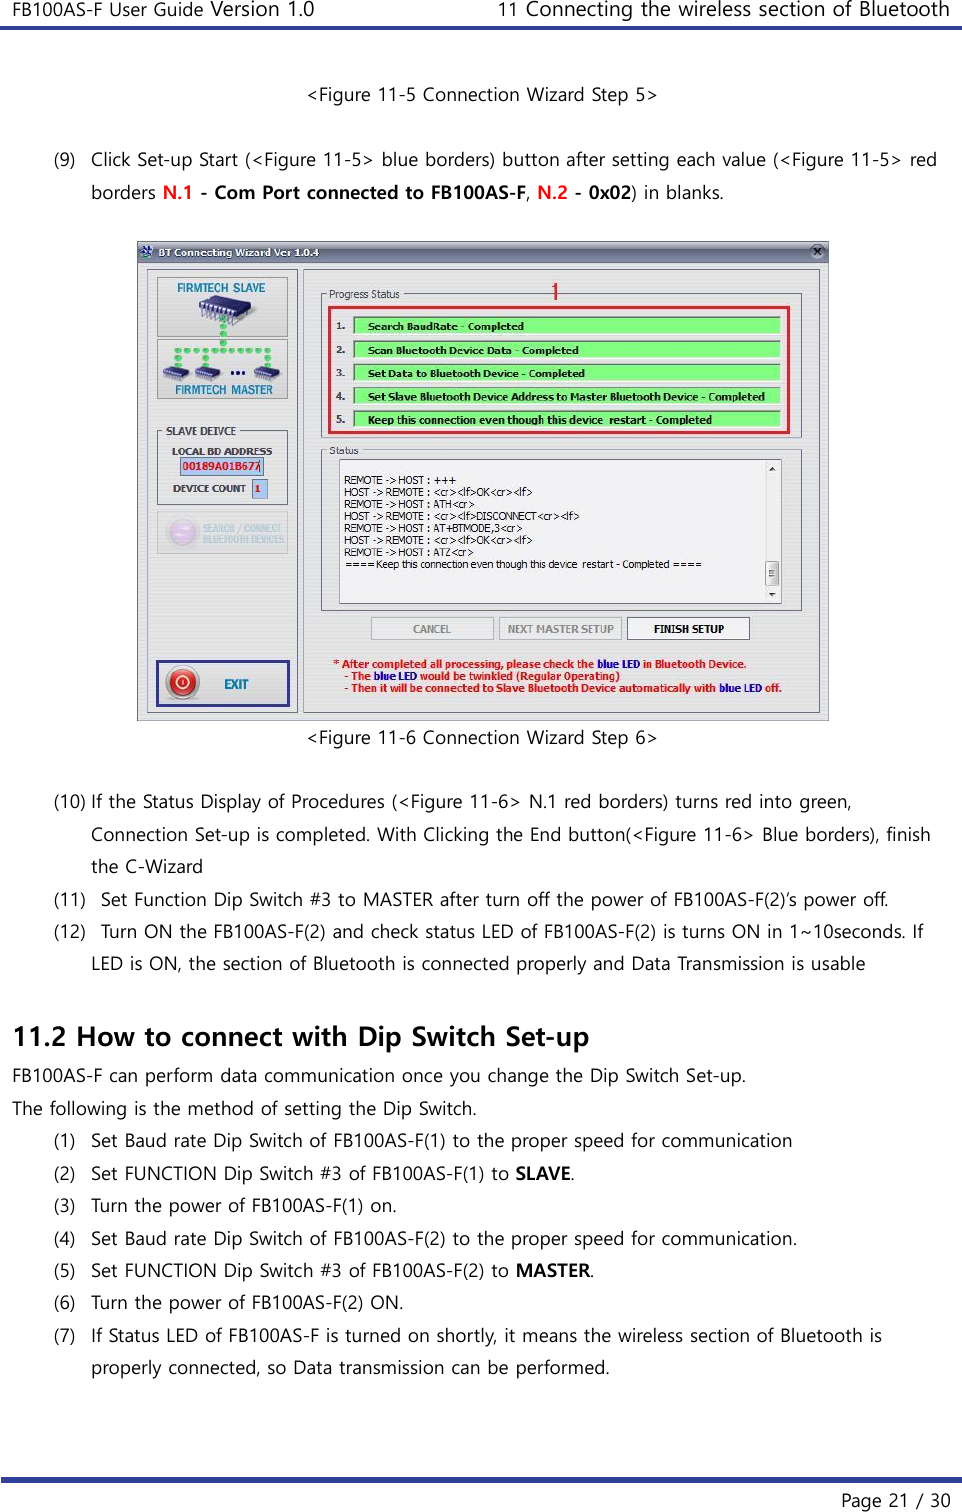 FB100AS-F User Guide Version 1.0 11 Connecting the wireless section of Bluetooth   Page 21 / 30  &lt;Figure 11-5 Connection Wizard Step 5&gt;  (9) Click Set-up Start (&lt;Figure 11-5&gt; blue borders) button after setting each value (&lt;Figure 11-5&gt; red borders N.1 - Com Port connected to FB100AS-F, N.2 - 0x02) in blanks.   &lt;Figure 11-6 Connection Wizard Step 6&gt;  (10) If the Status Display of Procedures (&lt;Figure 11-6&gt; N.1 red borders) turns red into green, Connection Set-up is completed. With Clicking the End button(&lt;Figure 11-6&gt; Blue borders), finish the C-Wizard (11)   Set Function Dip Switch #3 to MASTER after turn off the power of FB100AS-F(2)’s power off. (12)   Turn ON the FB100AS-F(2) and check status LED of FB100AS-F(2) is turns ON in 1~10seconds. If LED is ON, the section of Bluetooth is connected properly and Data Transmission is usable  11.2 How to connect with Dip Switch Set-up FB100AS-F can perform data communication once you change the Dip Switch Set-up. The following is the method of setting the Dip Switch. (1) Set Baud rate Dip Switch of FB100AS-F(1) to the proper speed for communication (2) Set FUNCTION Dip Switch #3 of FB100AS-F(1) to SLAVE. (3) Turn the power of FB100AS-F(1) on. (4) Set Baud rate Dip Switch of FB100AS-F(2) to the proper speed for communication. (5) Set FUNCTION Dip Switch #3 of FB100AS-F(2) to MASTER. (6) Turn the power of FB100AS-F(2) ON. (7) If Status LED of FB100AS-F is turned on shortly, it means the wireless section of Bluetooth is properly connected, so Data transmission can be performed.    